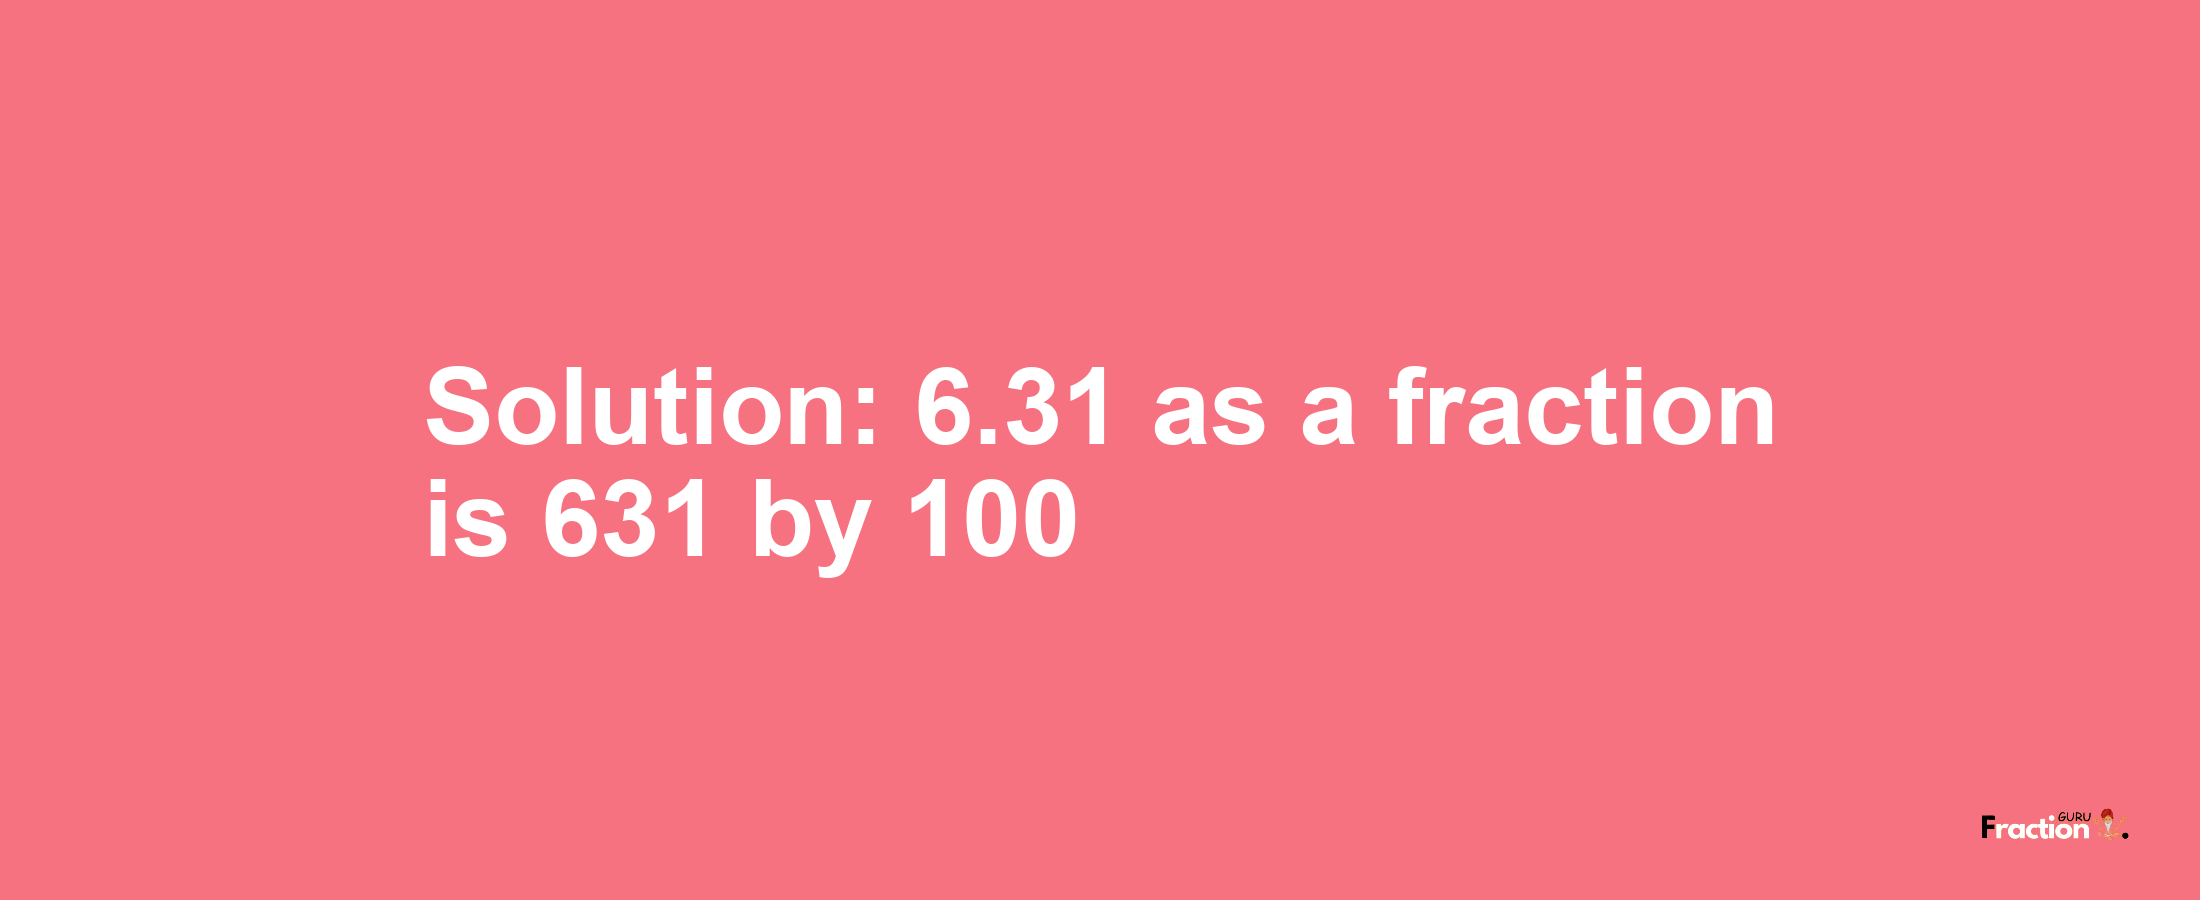 Solution:6.31 as a fraction is 631/100